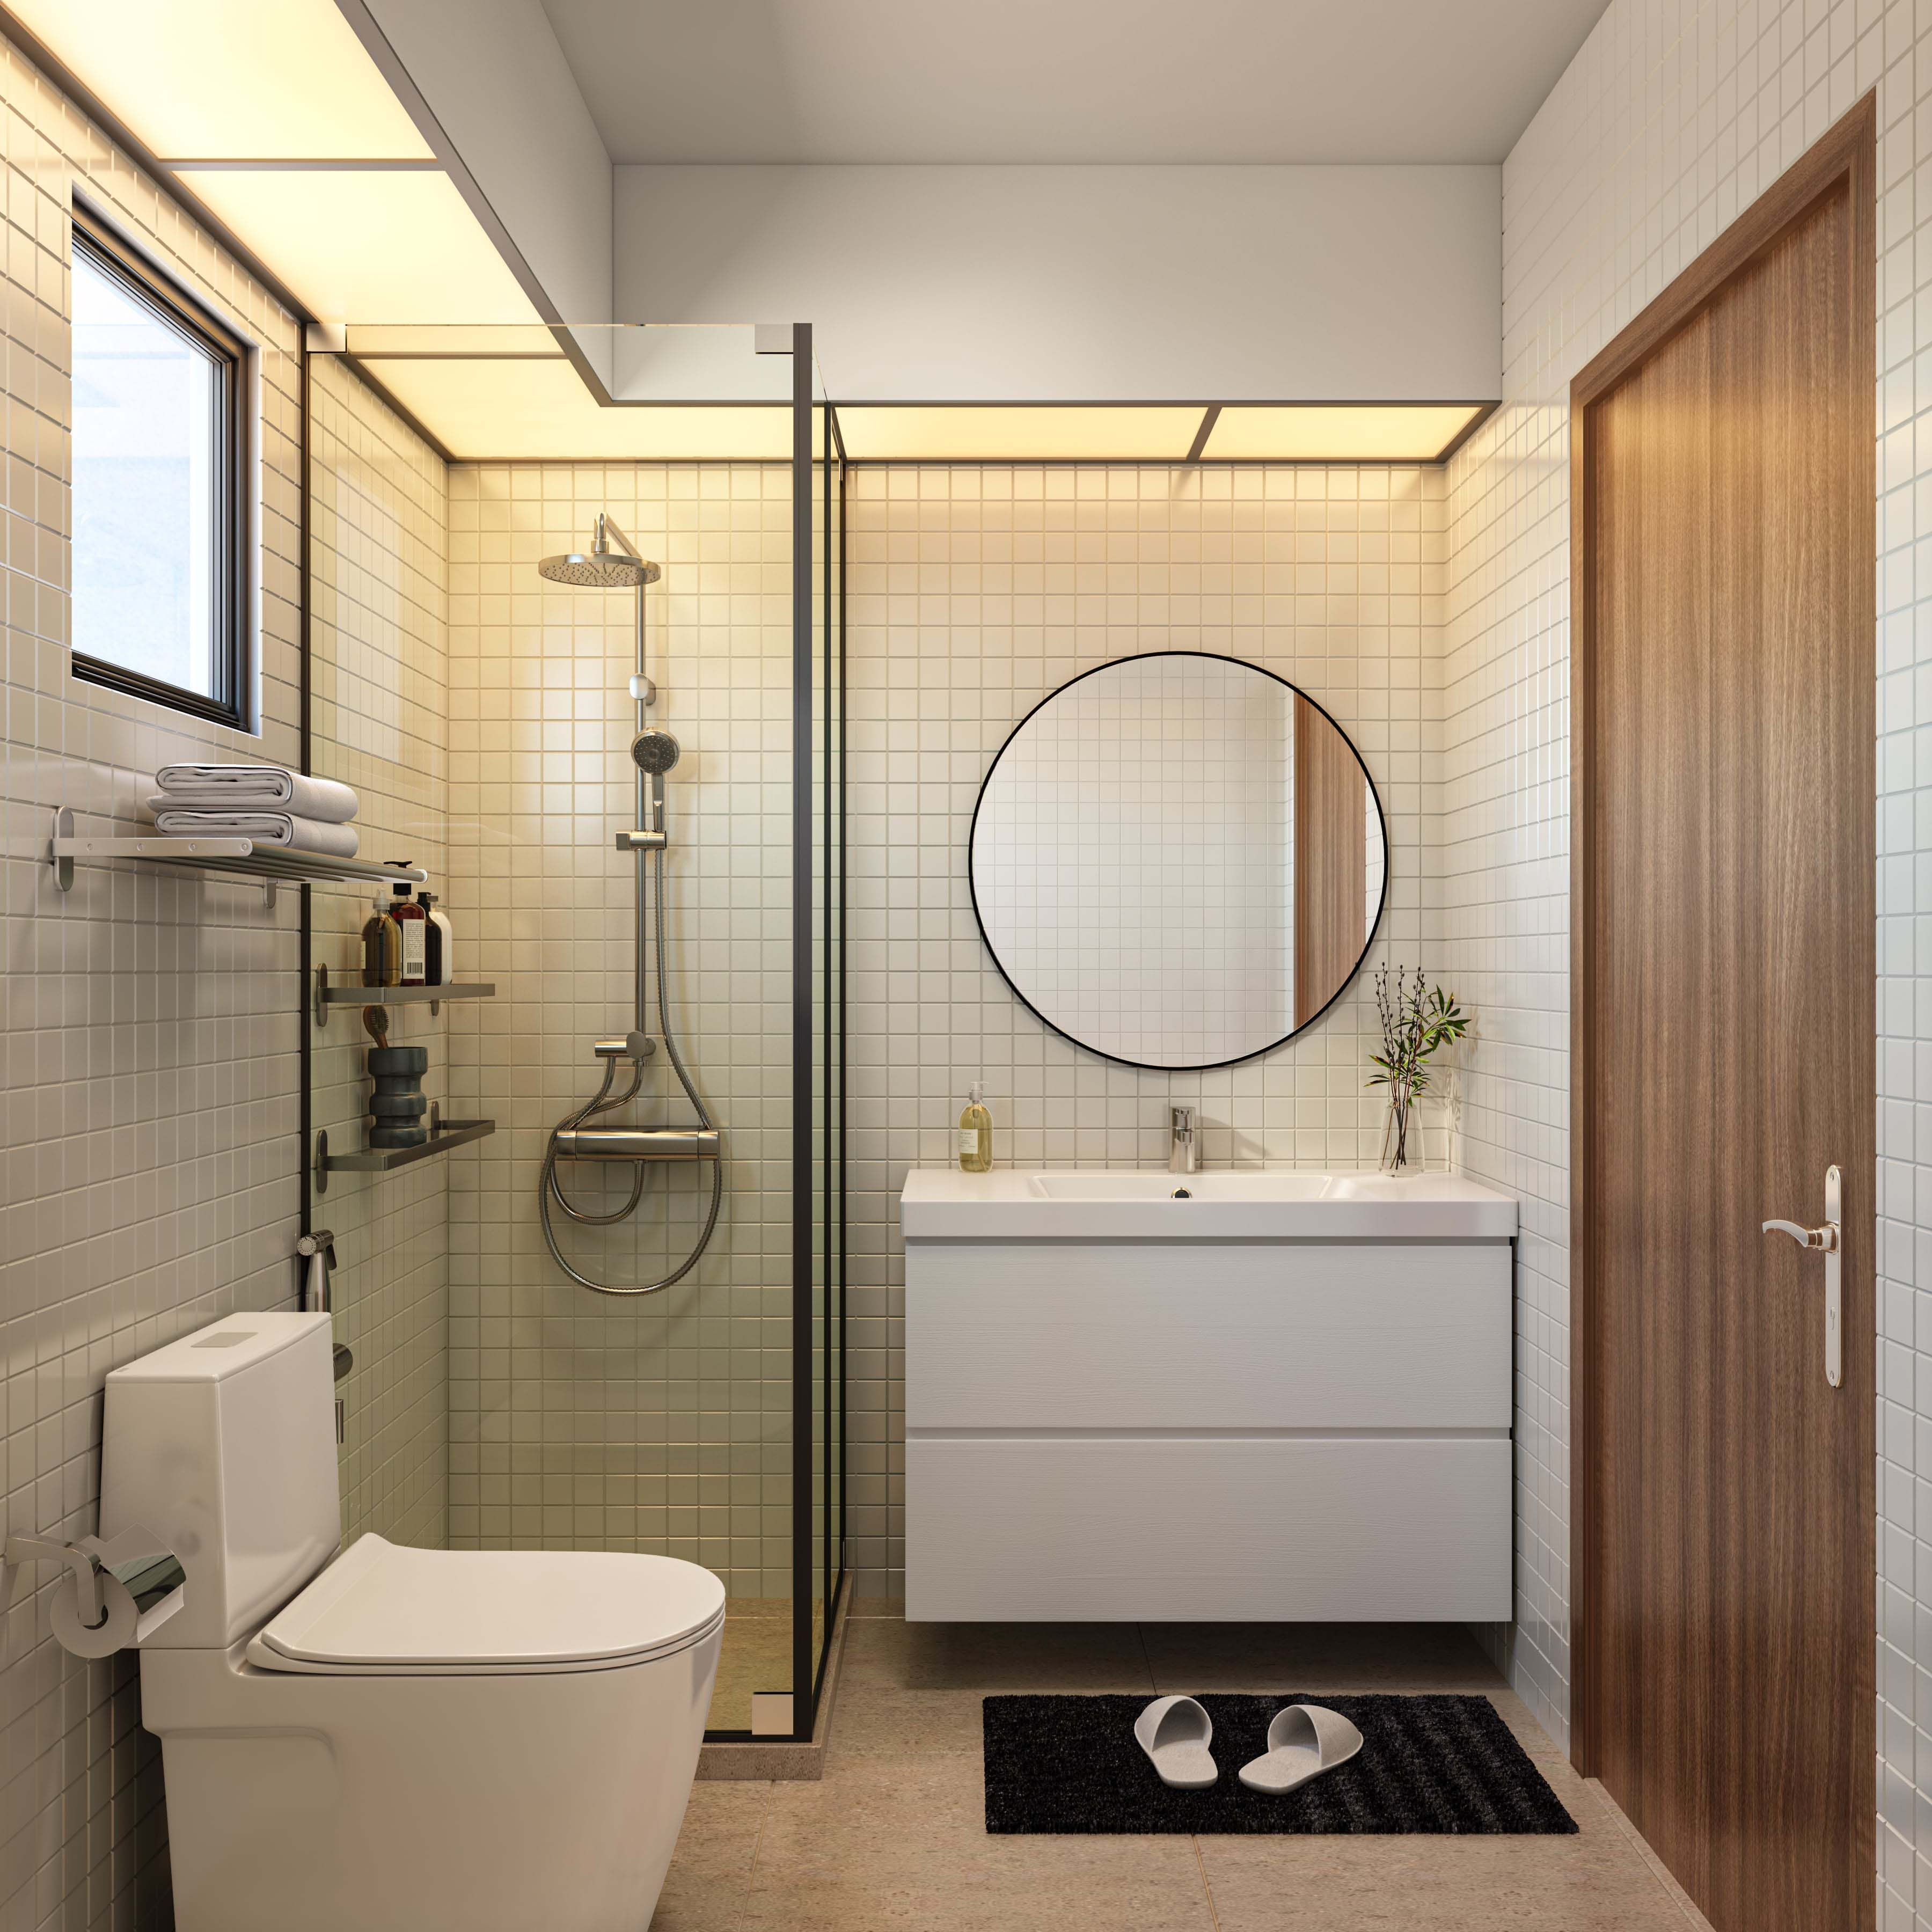 Minimal Off-White And Beige Bathroom Design With White Bathroom Cabinet